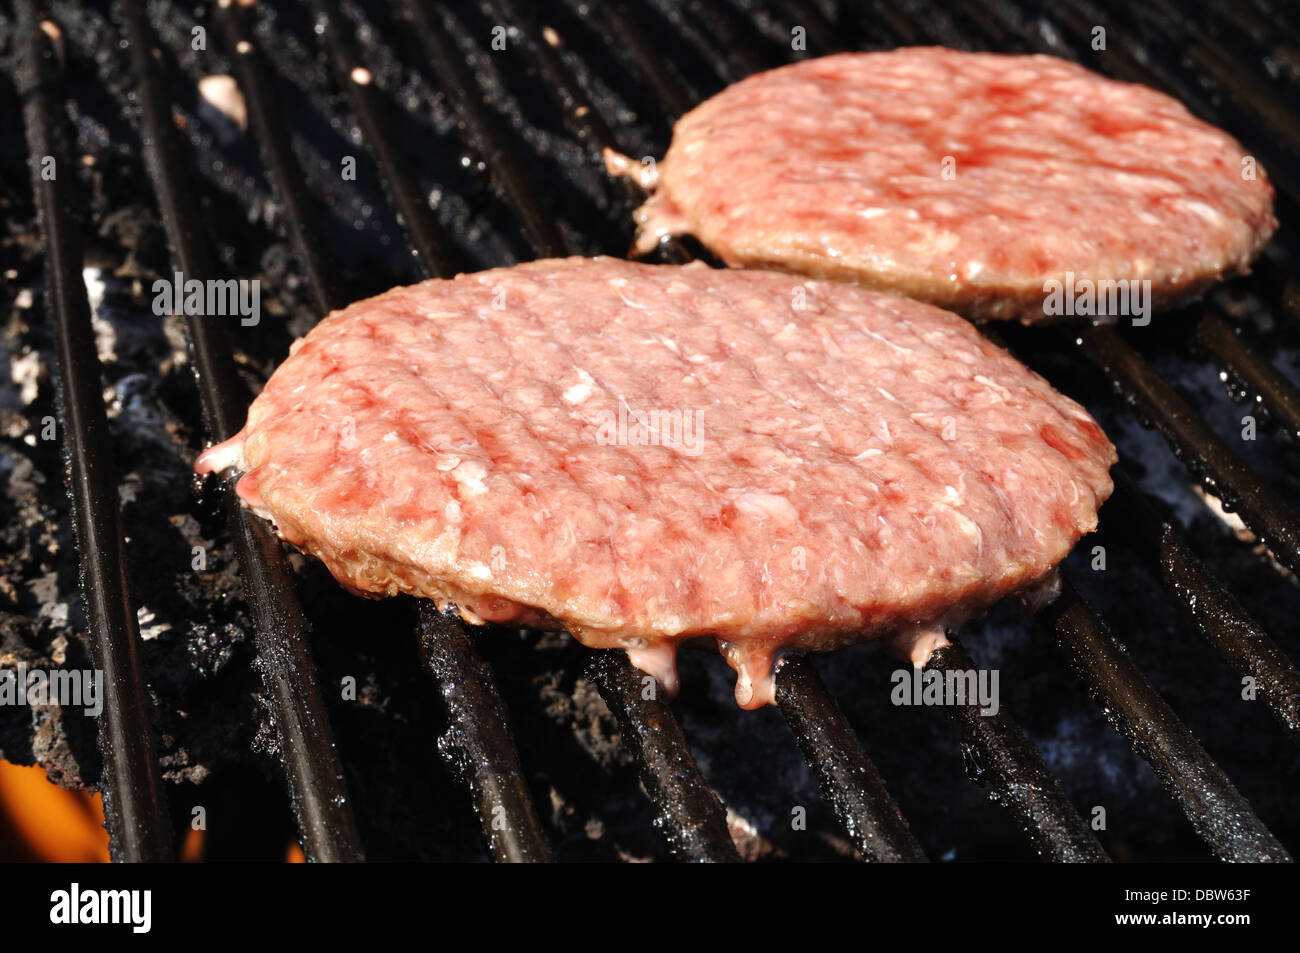 Burgers on the BBQ Stock Photo